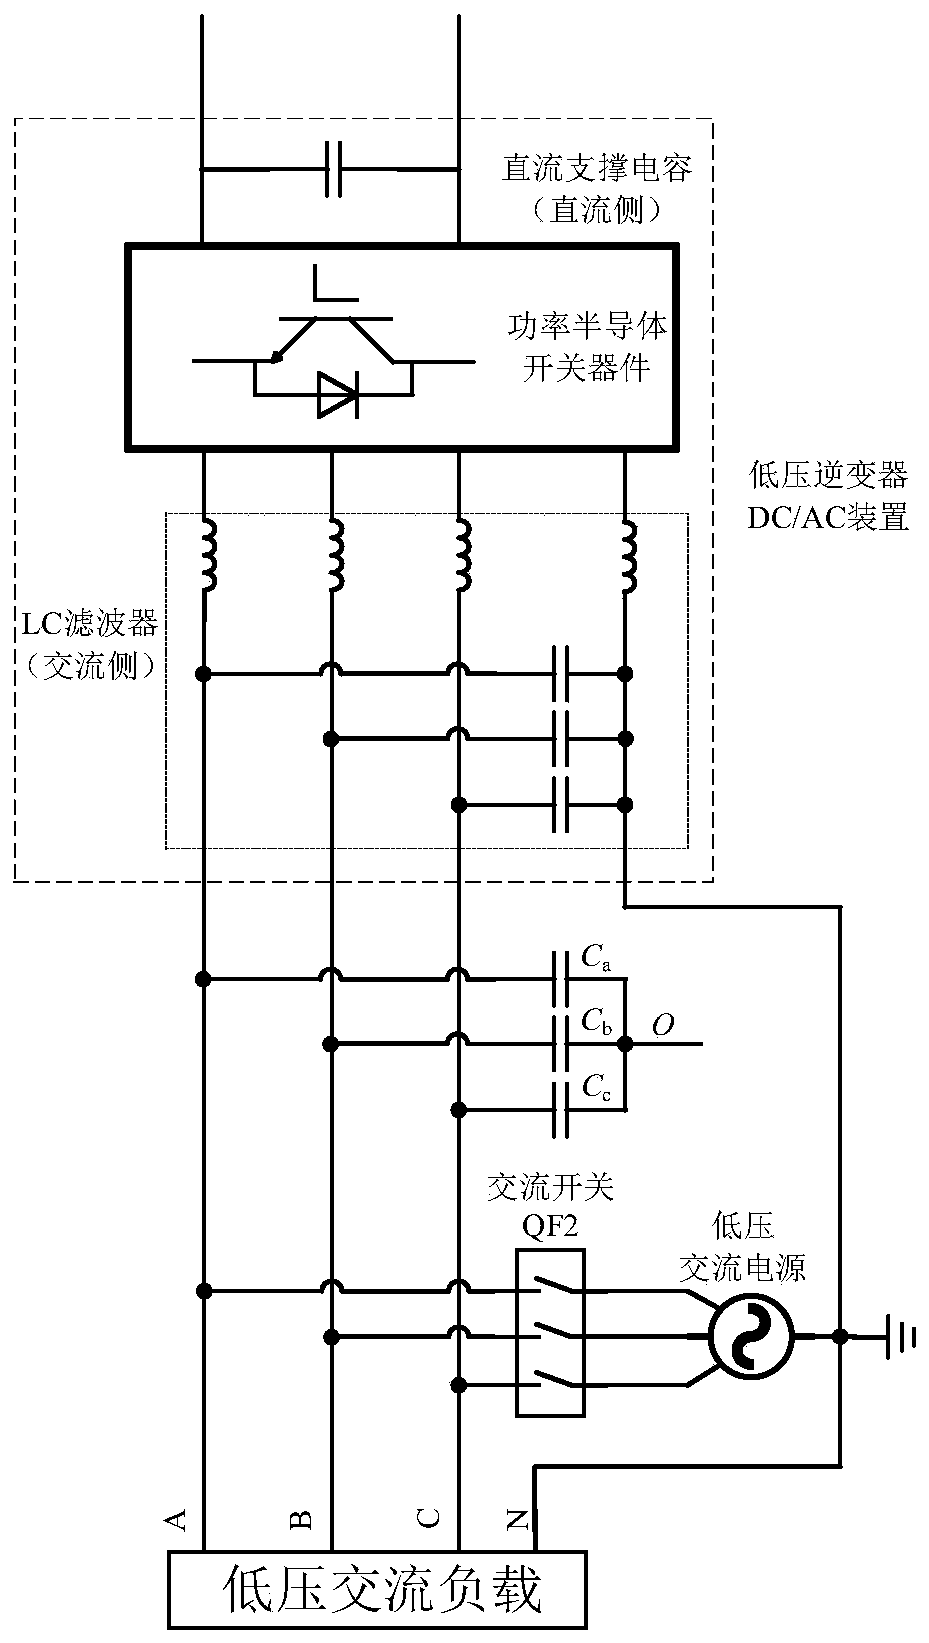 Alternating current and direct current power supply system with grounded power supply end